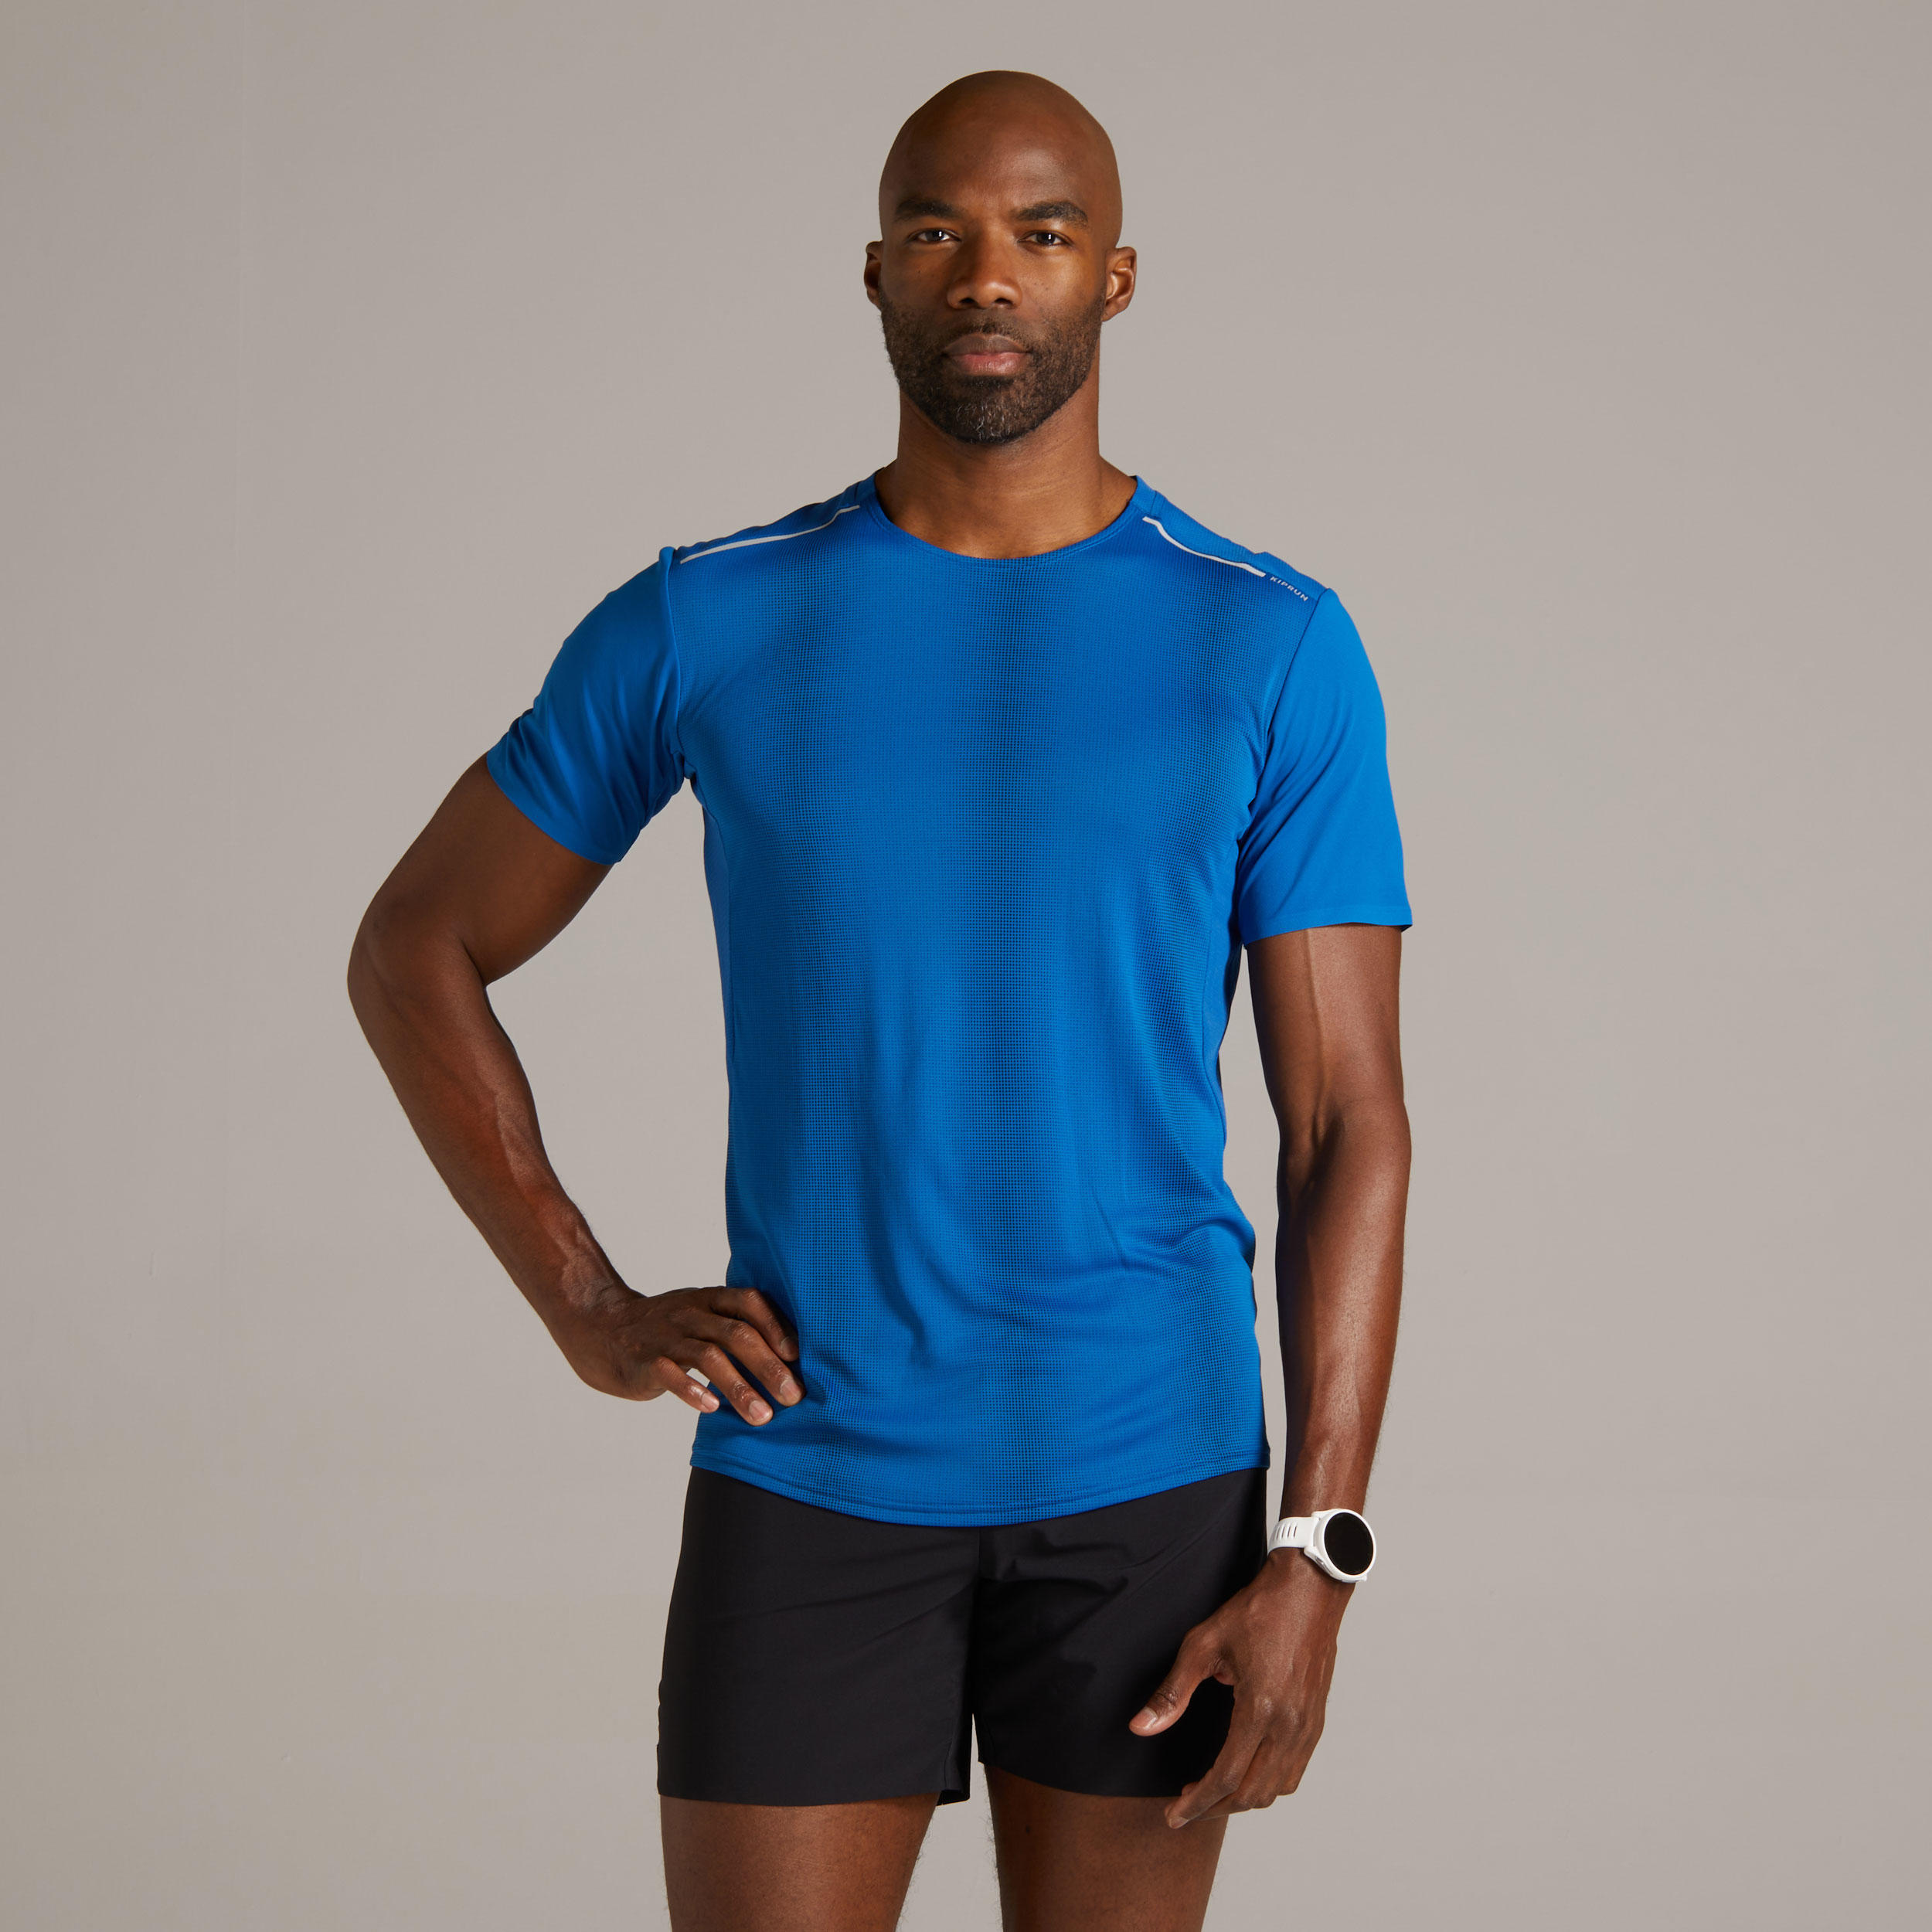 Onorevoli RUNNING Manica Corta Top Athletic Armour Donne Jogging layer di base gym 